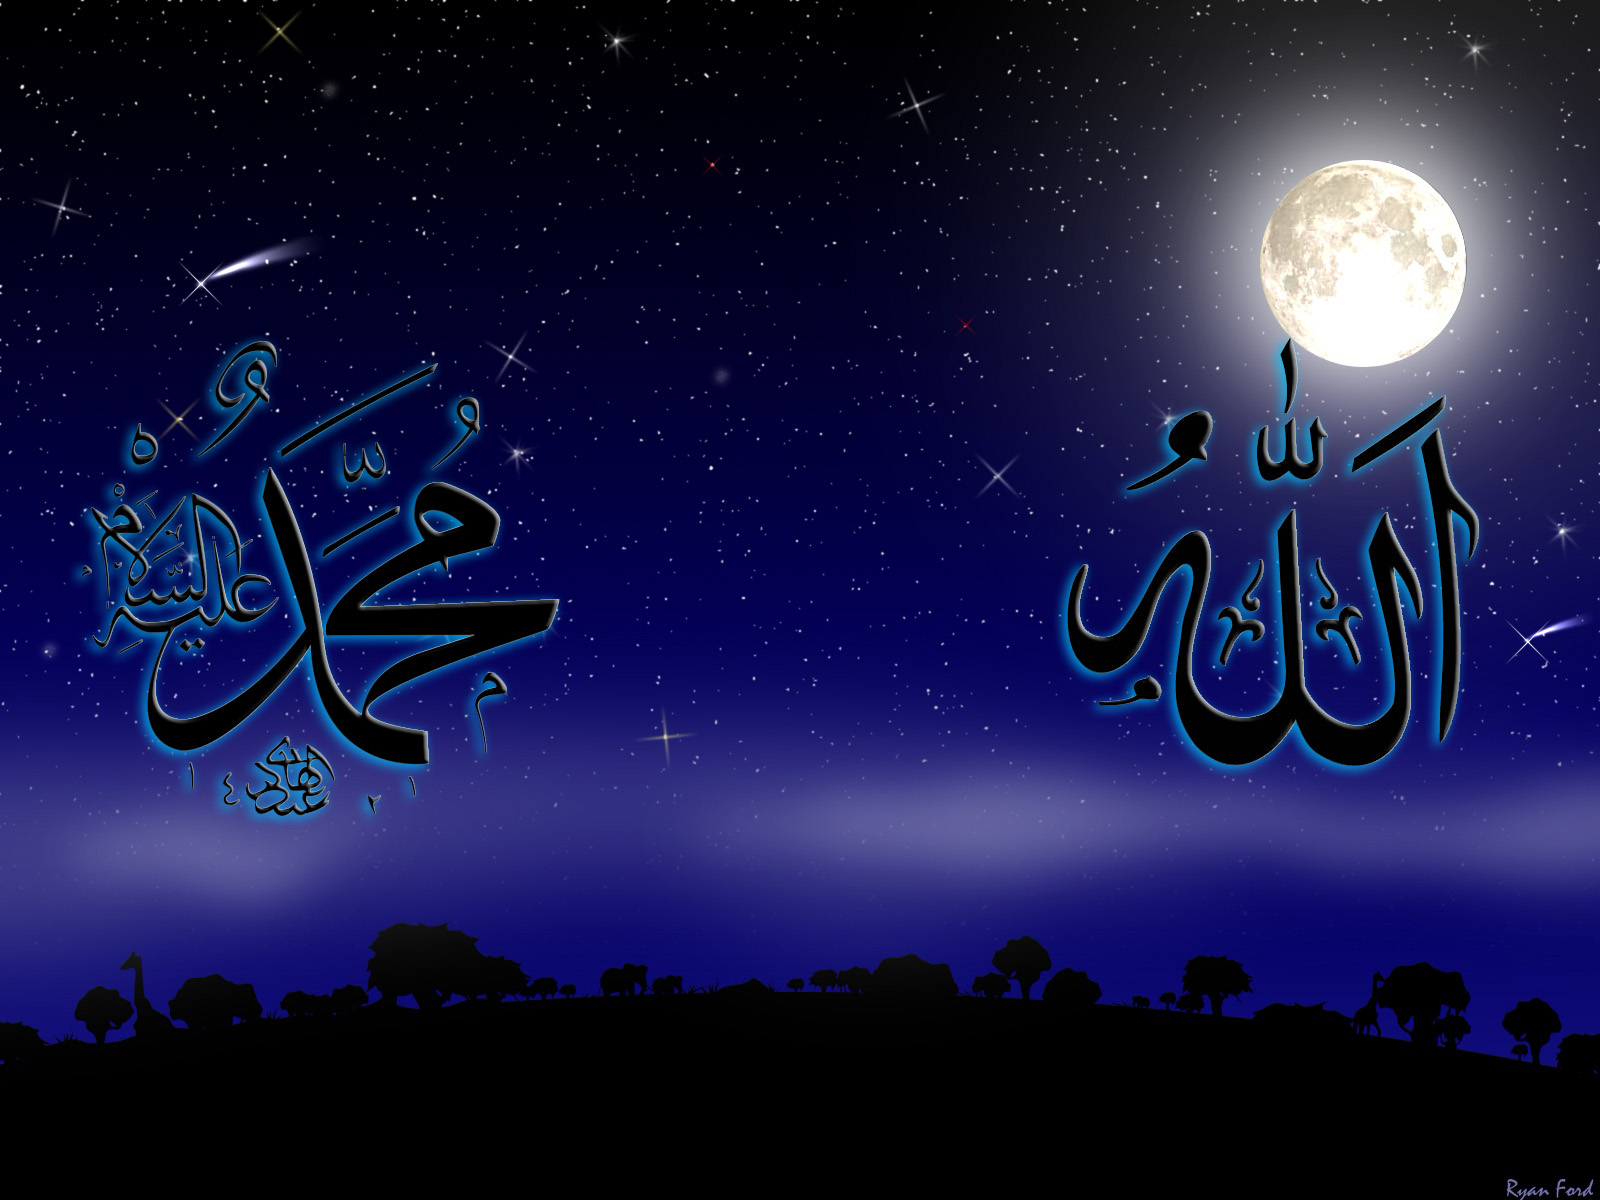 Name Of Allah And Muhammad Saw With Moon Islamic